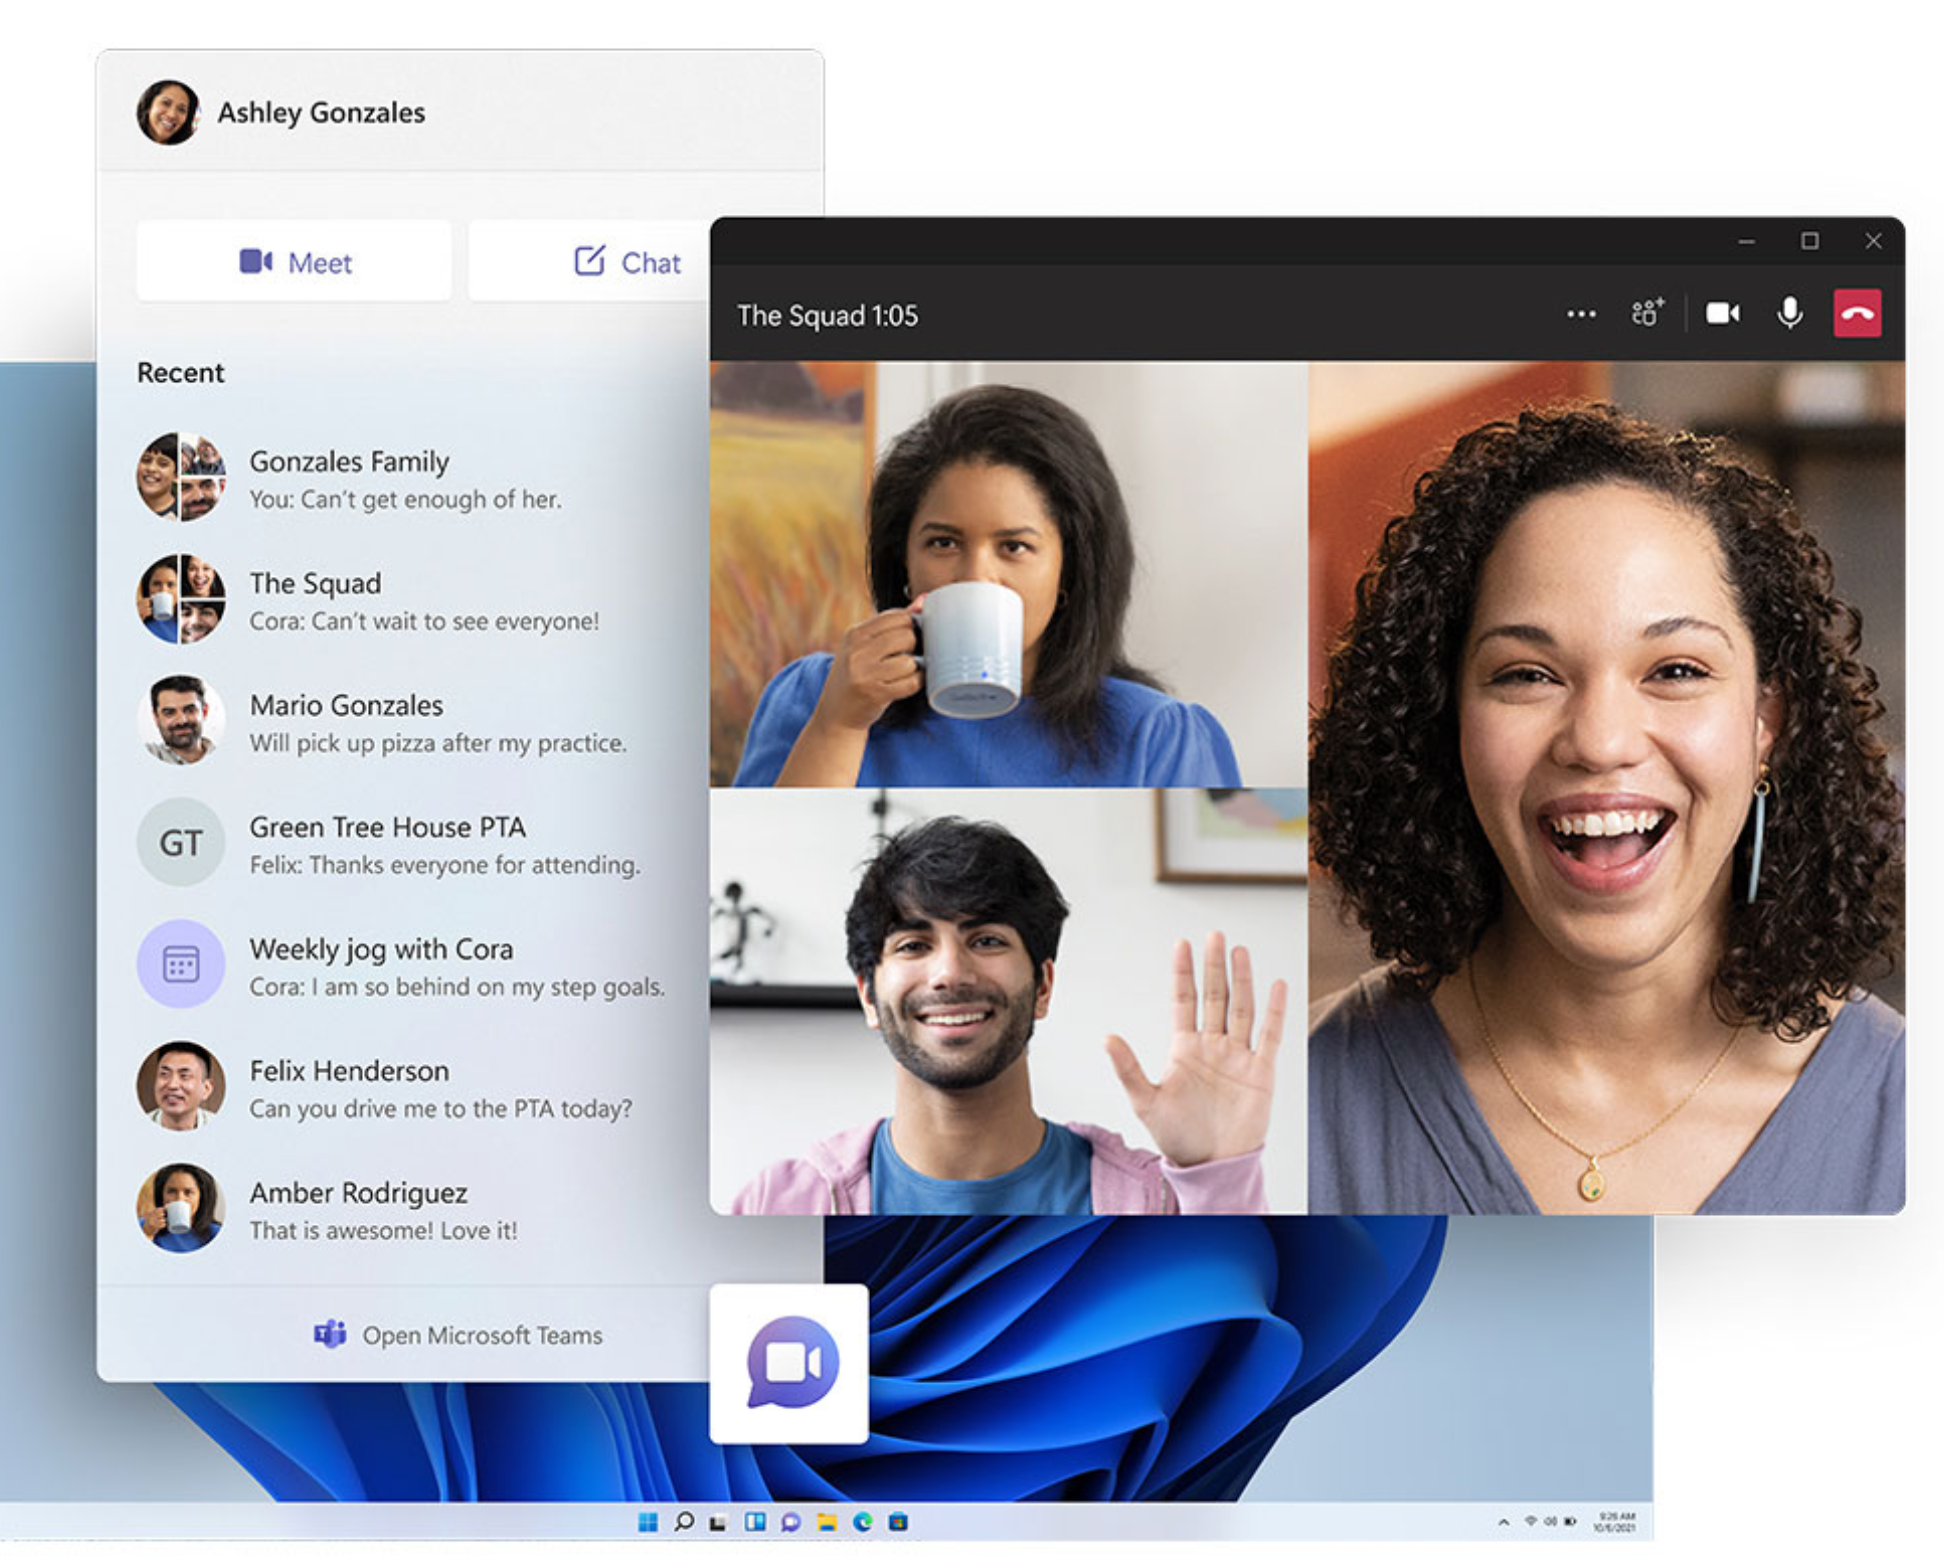 These are the most commonly used shortcuts for Microsoft Teams